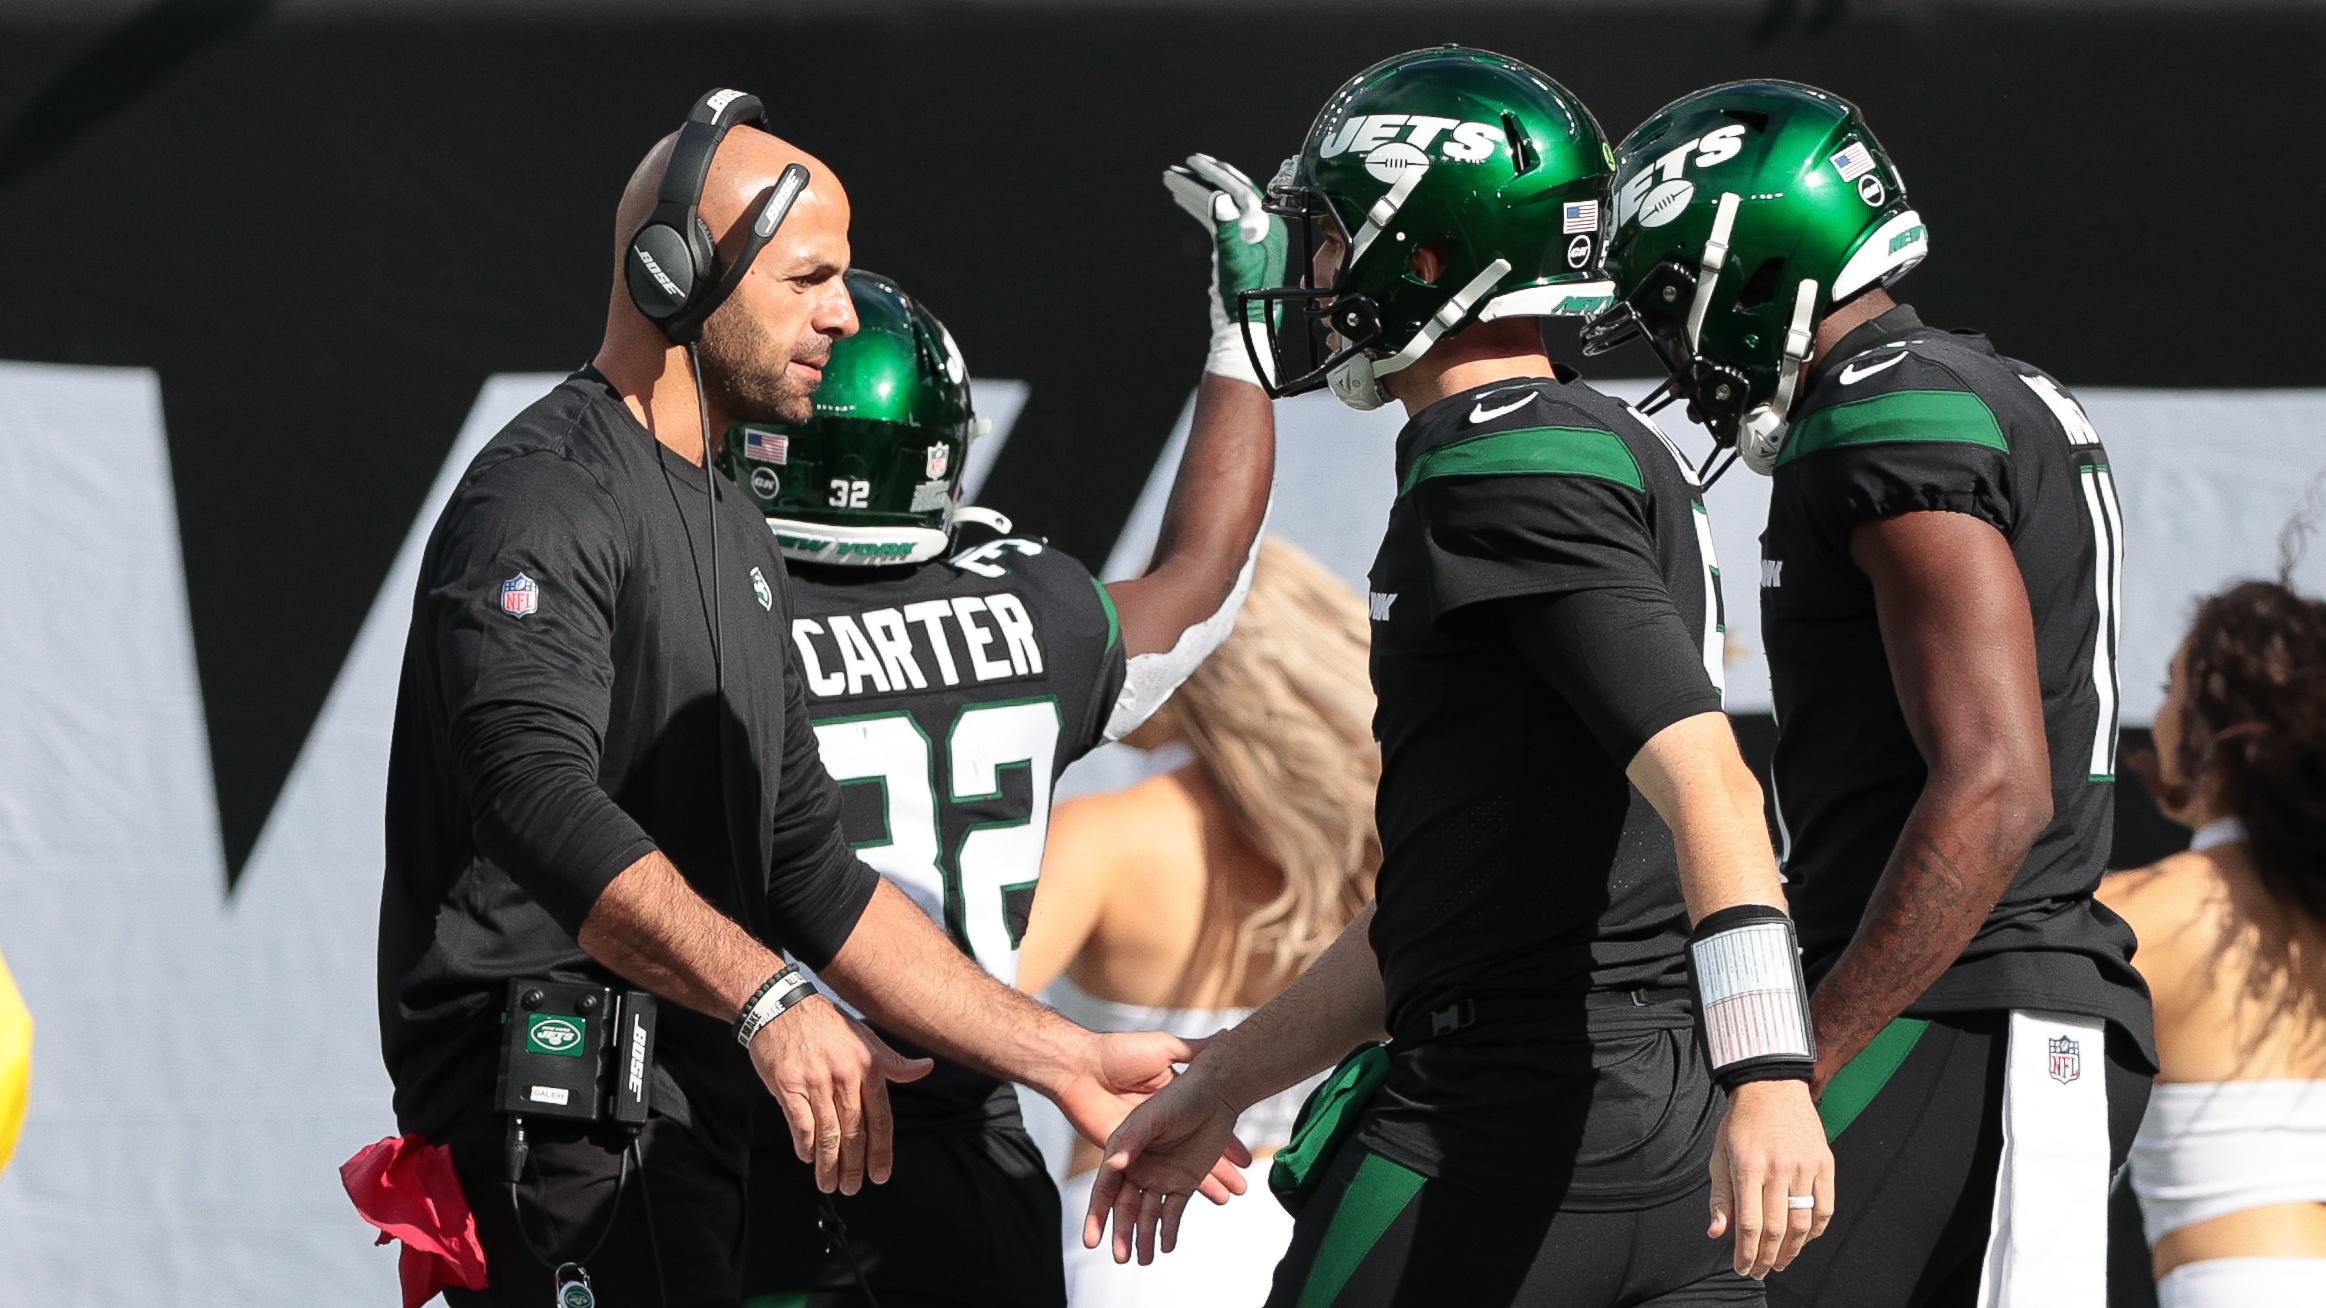 Oct 31, 2021; East Rutherford, New Jersey, USA; New York Jets head coach Robert Saleh shakes hands with quarterback Mike White (5) after a touchdown during the first half against the Cincinnati Bengals at MetLife Stadium. Mandatory Credit: Vincent Carchietta-USA TODAY Sports / © Vincent Carchietta-USA TODAY Sports